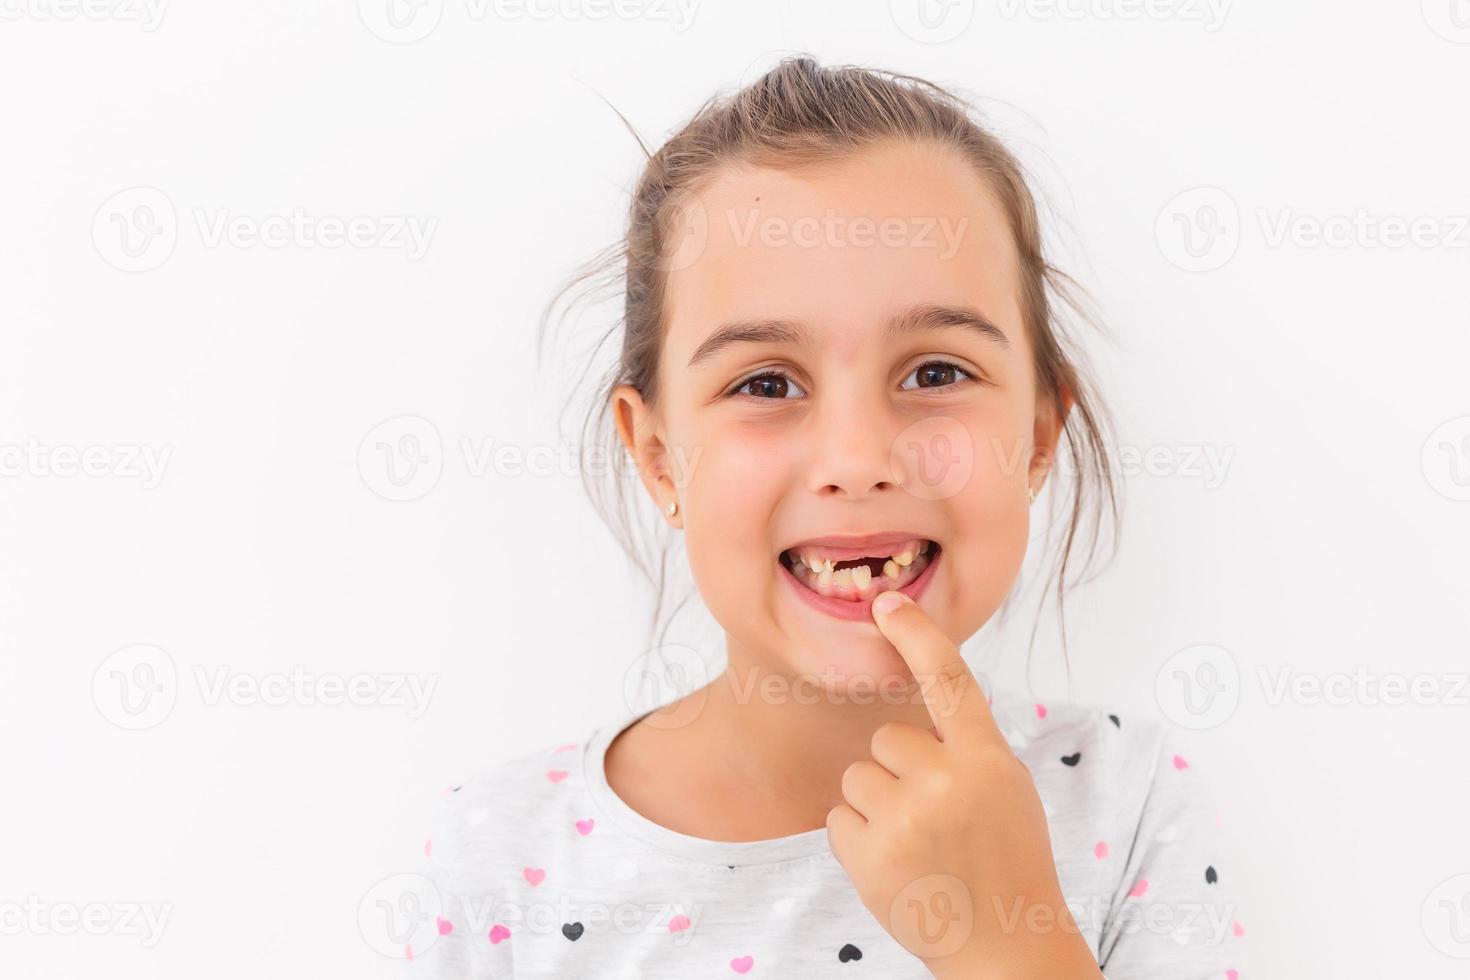 Little girl first tooth missing on a white background photo